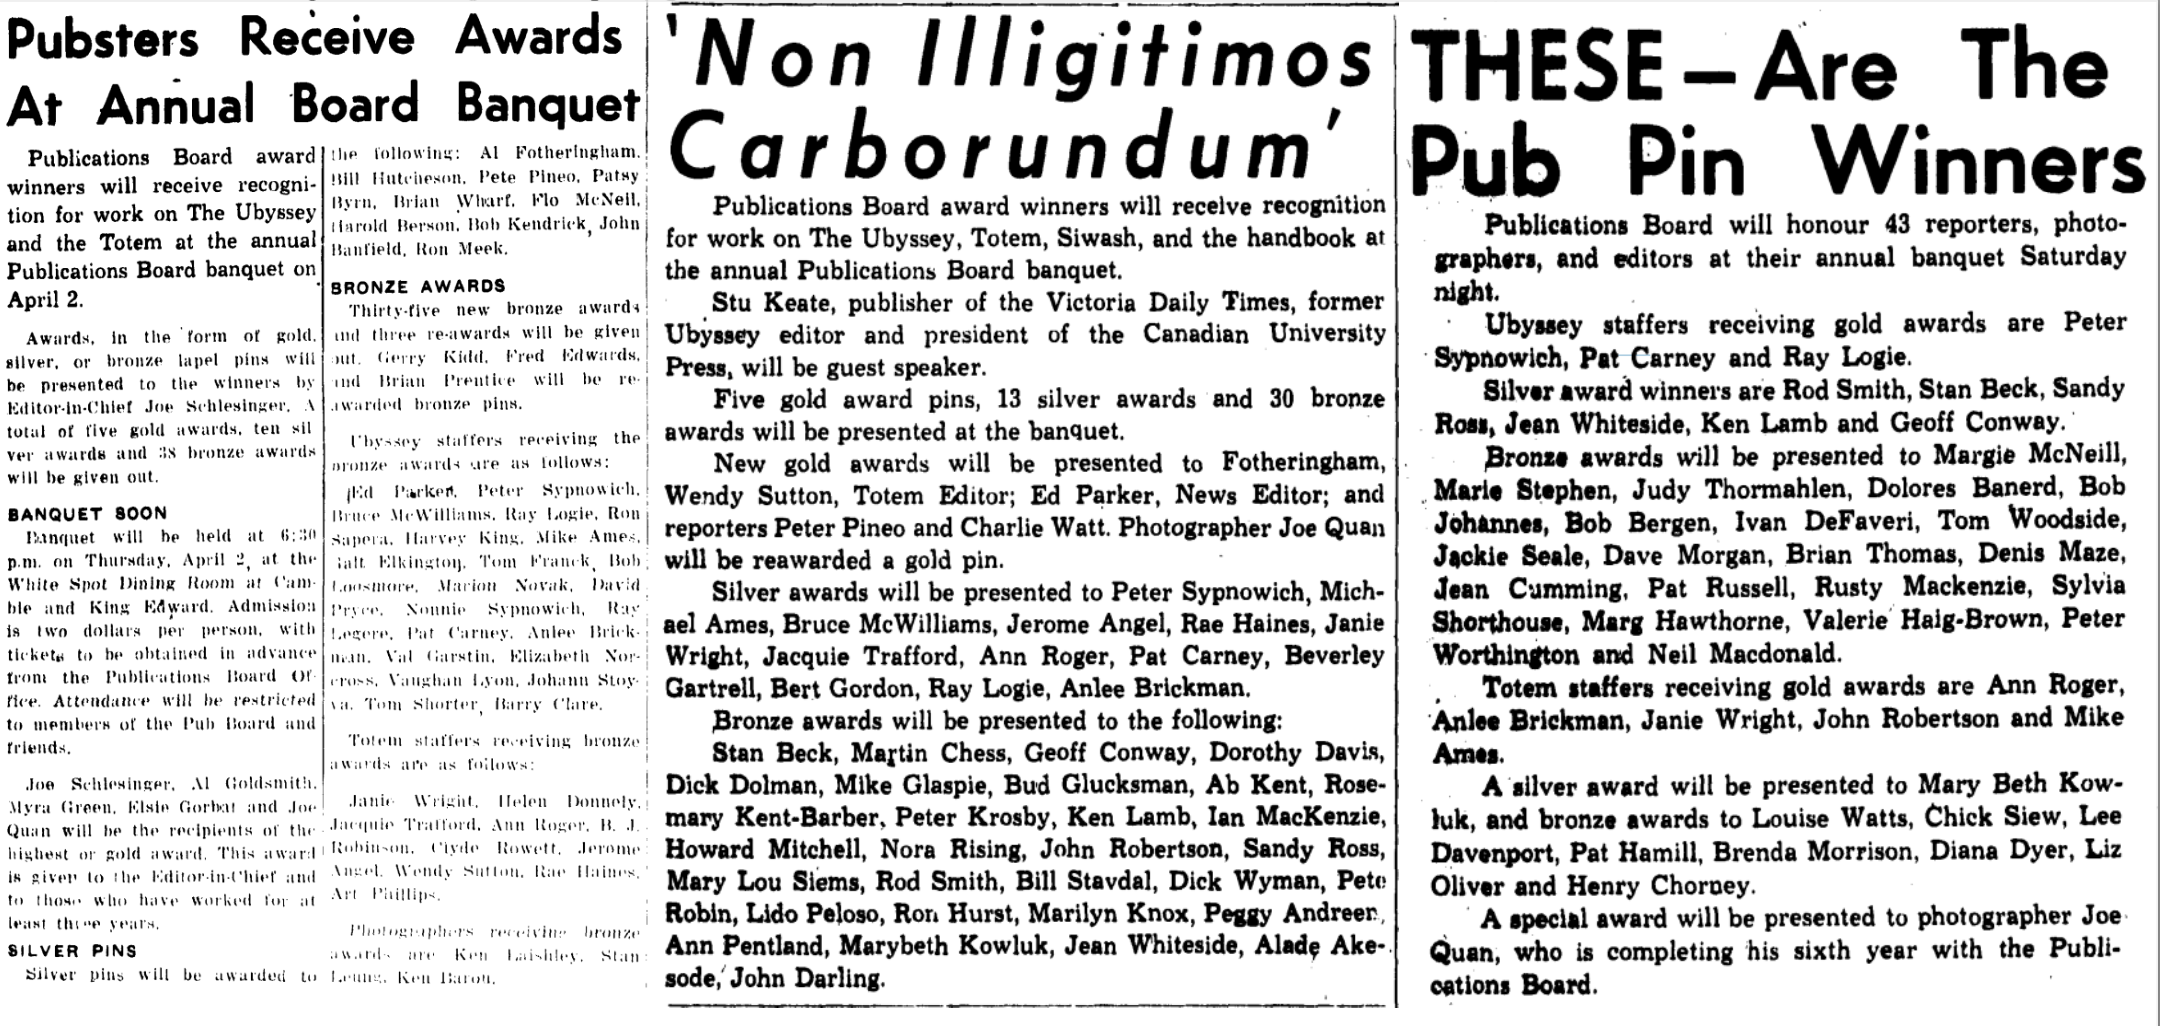 Articles from 1953 (left), 1954 (centre) and 1955 (right) that announce the pubster awards.